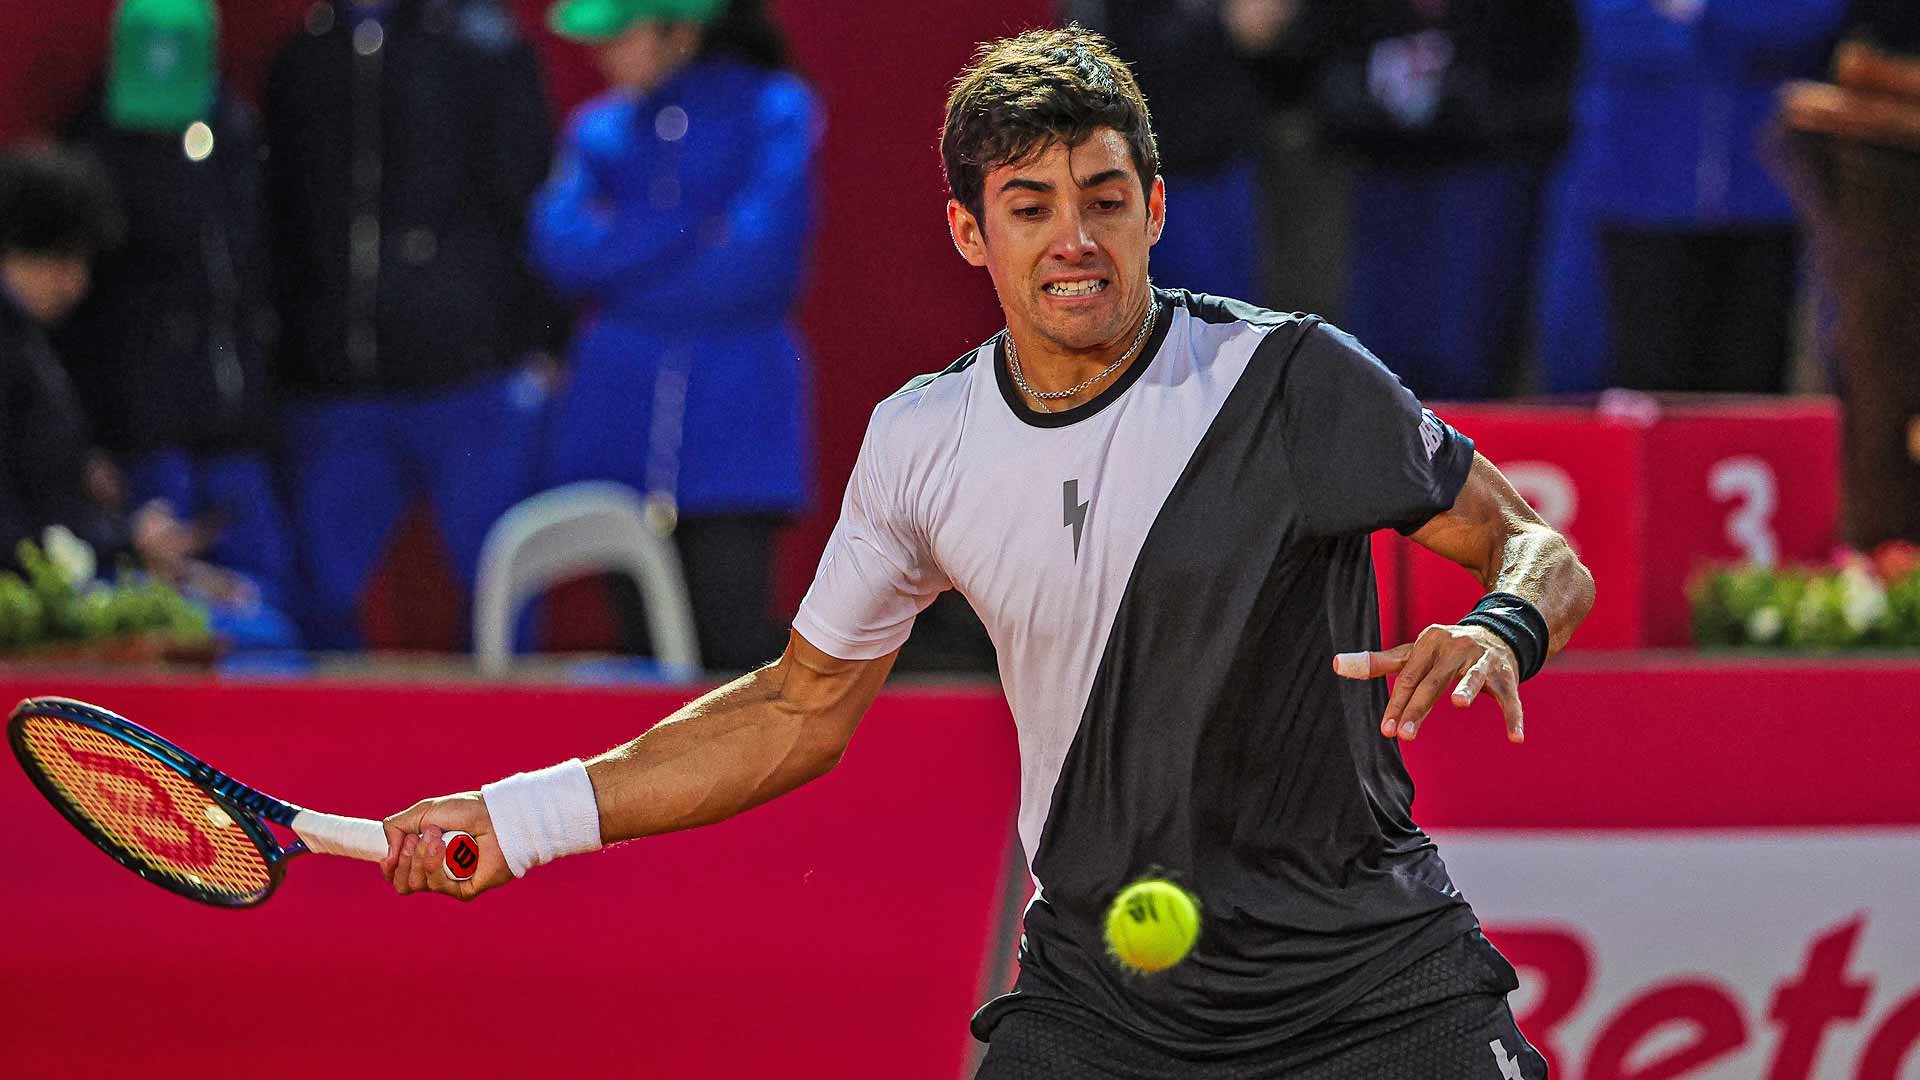 Cristian Garin will look to complete a first-round victory when he returns to court at the Millennium Estoril Open.